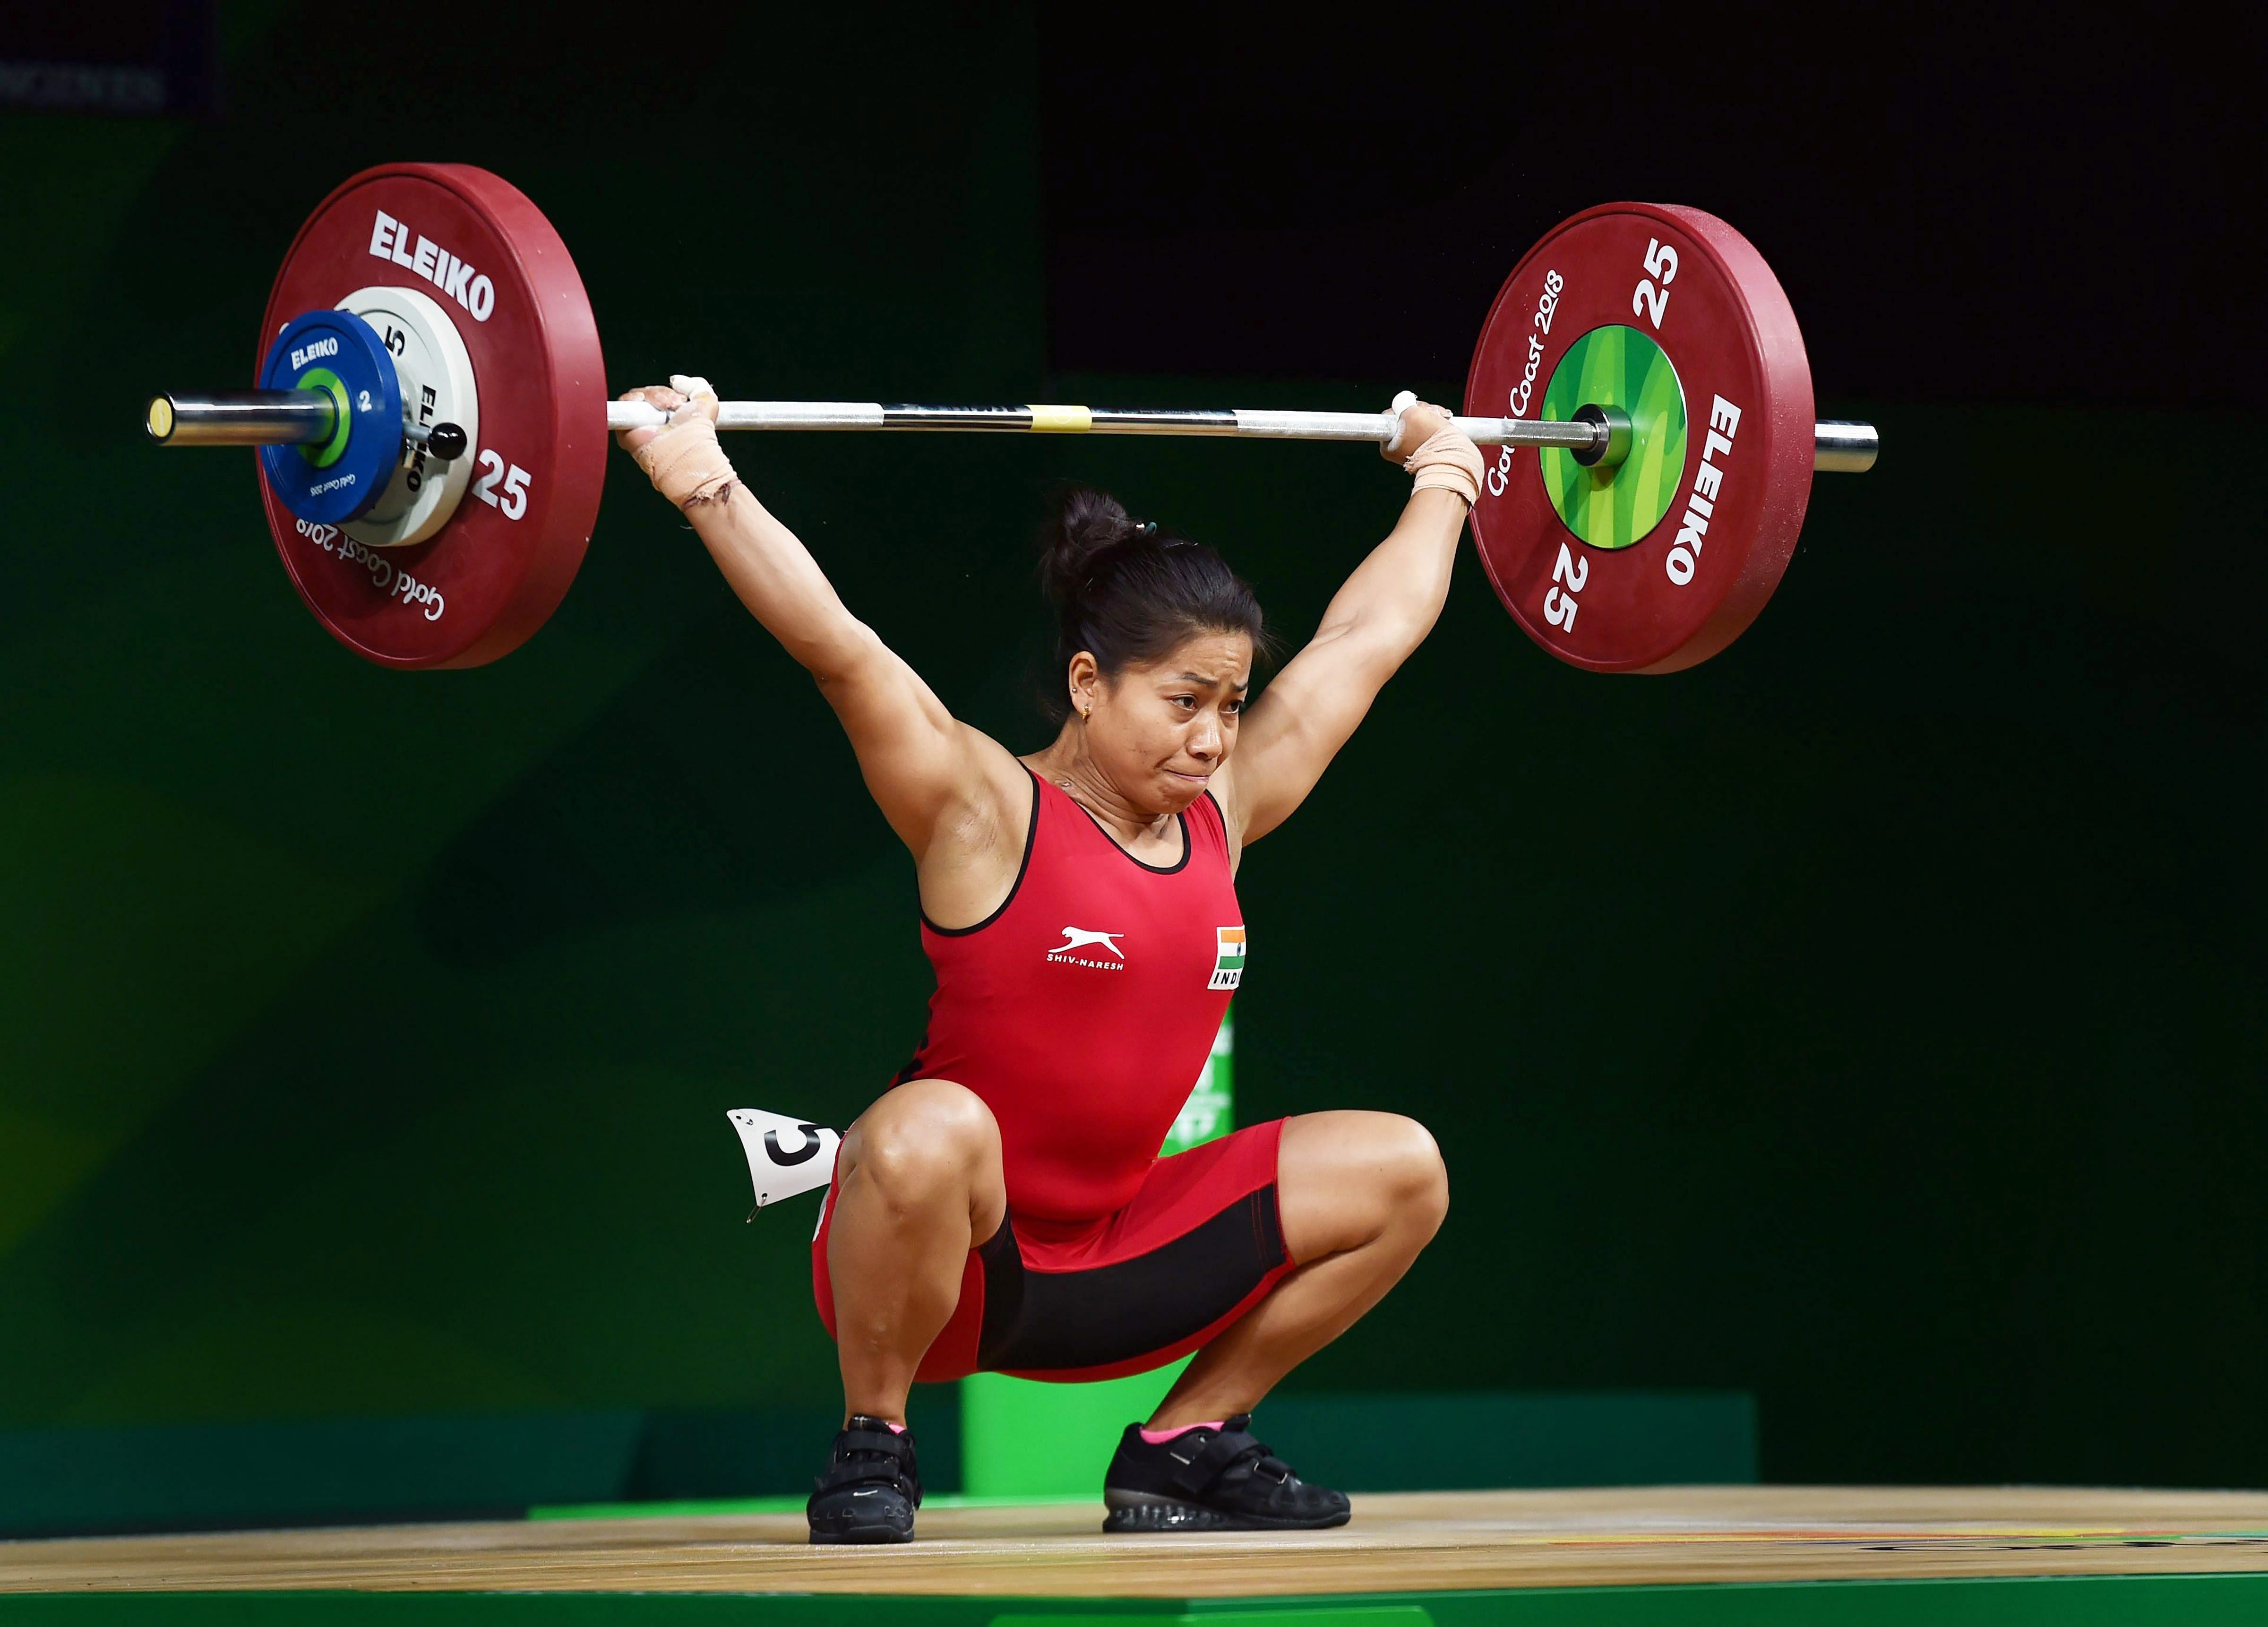 Indian weightlifter Sanjita Chanu competes in the women's 53kg weightlifting event during the Commonwealth Games 2018 in Gold Coast. Credits: PTI Photo